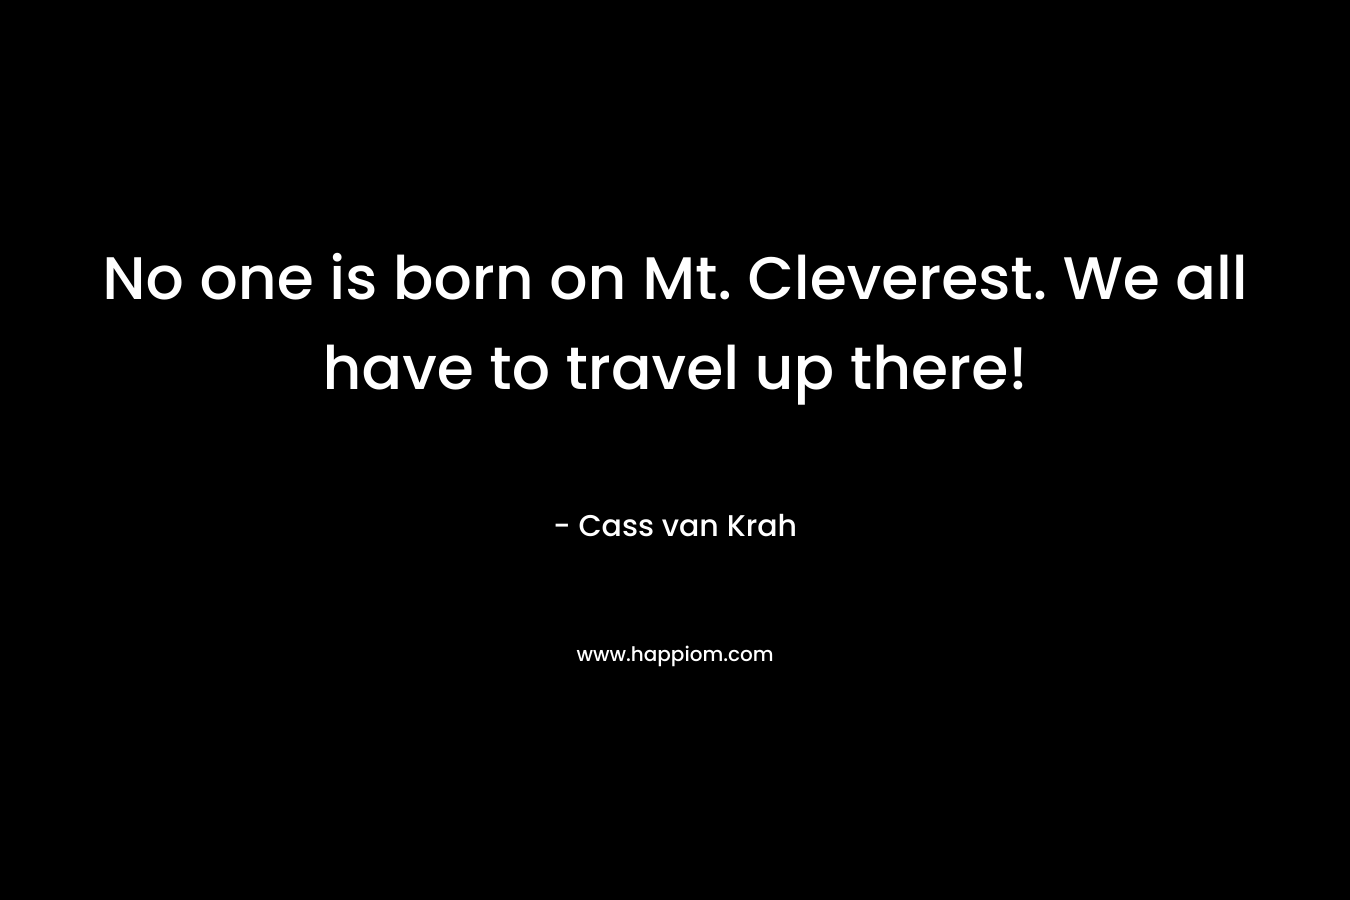 No one is born on Mt. Cleverest. We all have to travel up there! – Cass van Krah